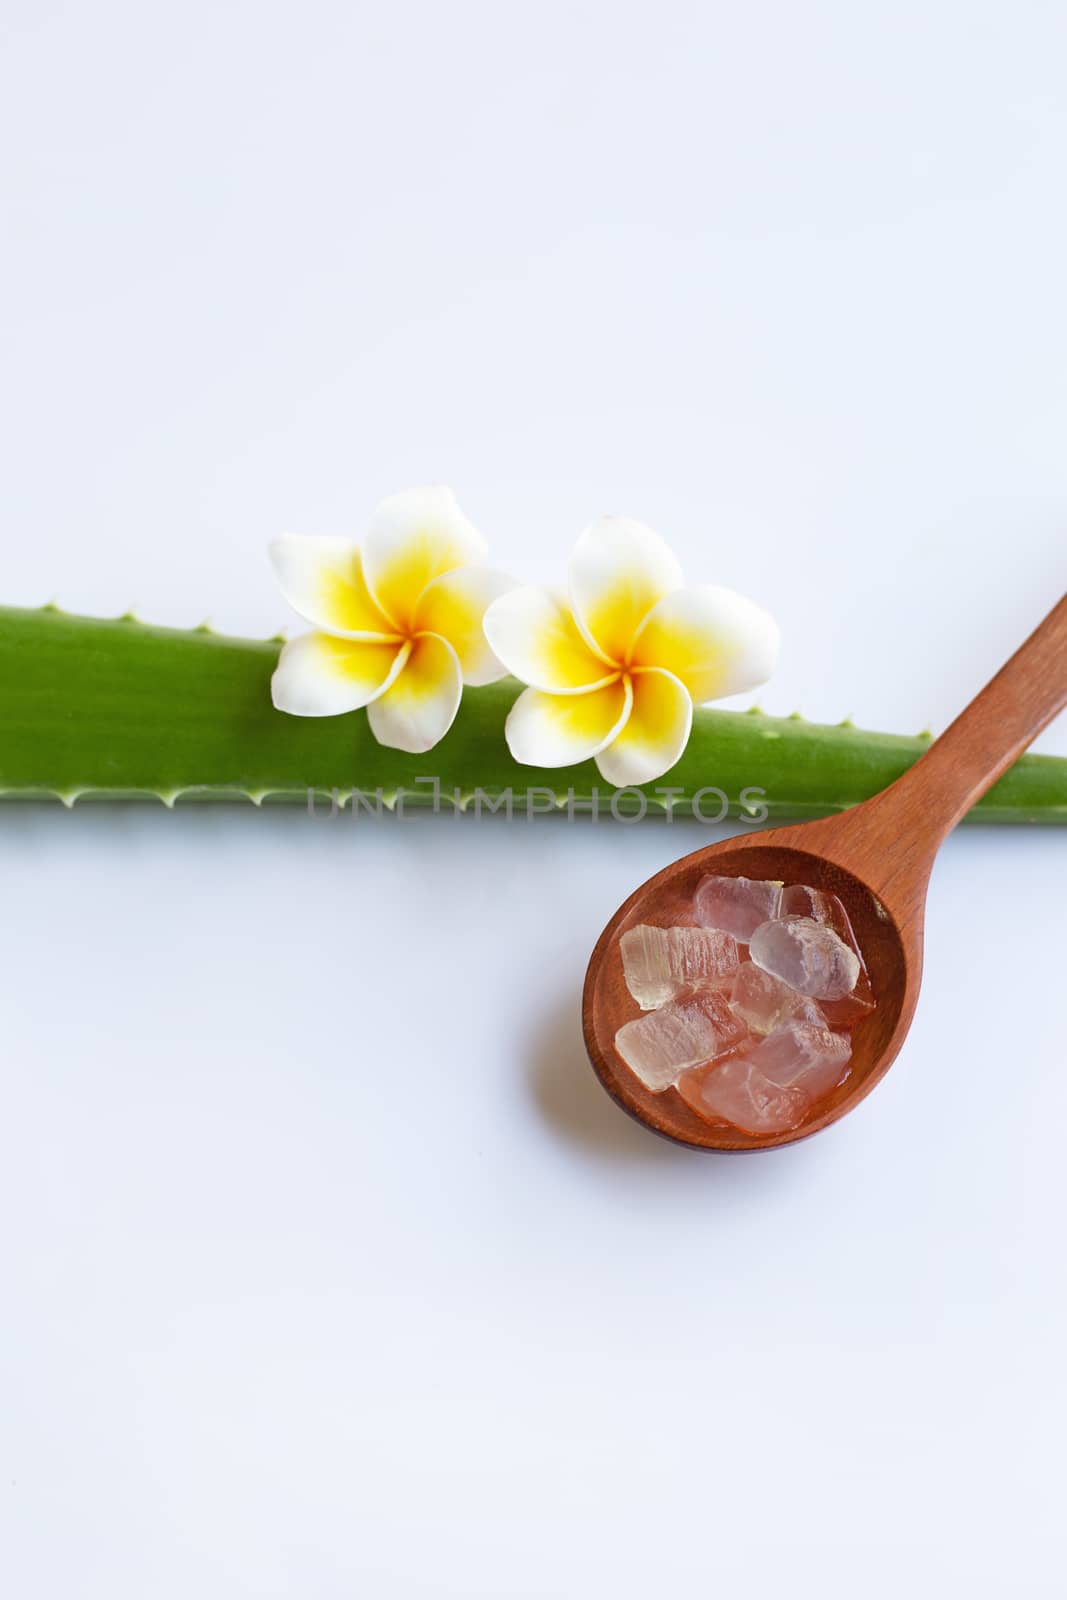 Aloe vera gel in wooden spoon and aloe vera leave with flower on white background. Copy space